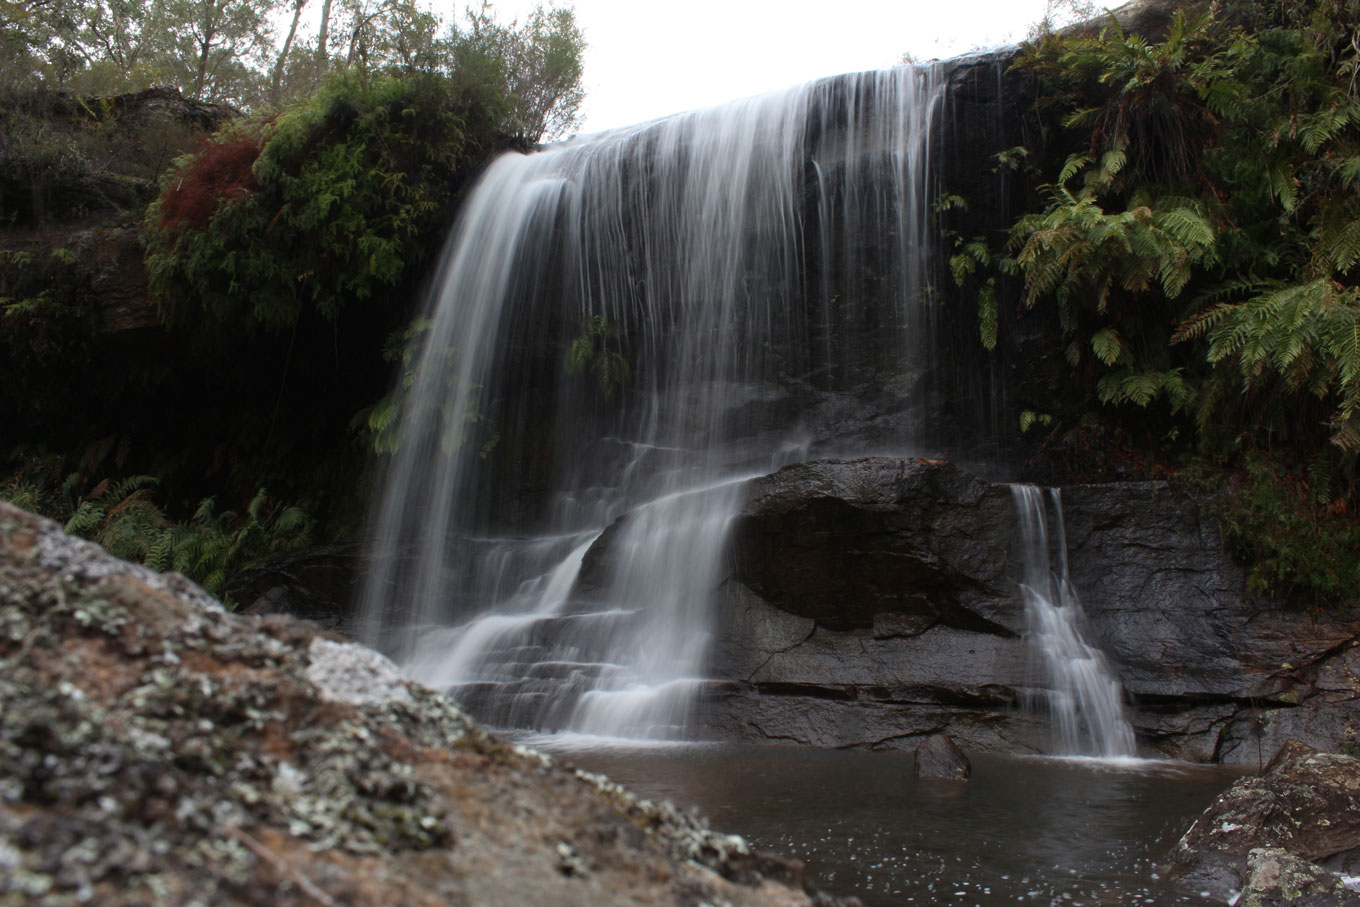 'Colo Vale Waterfall' © Bodhi Todd